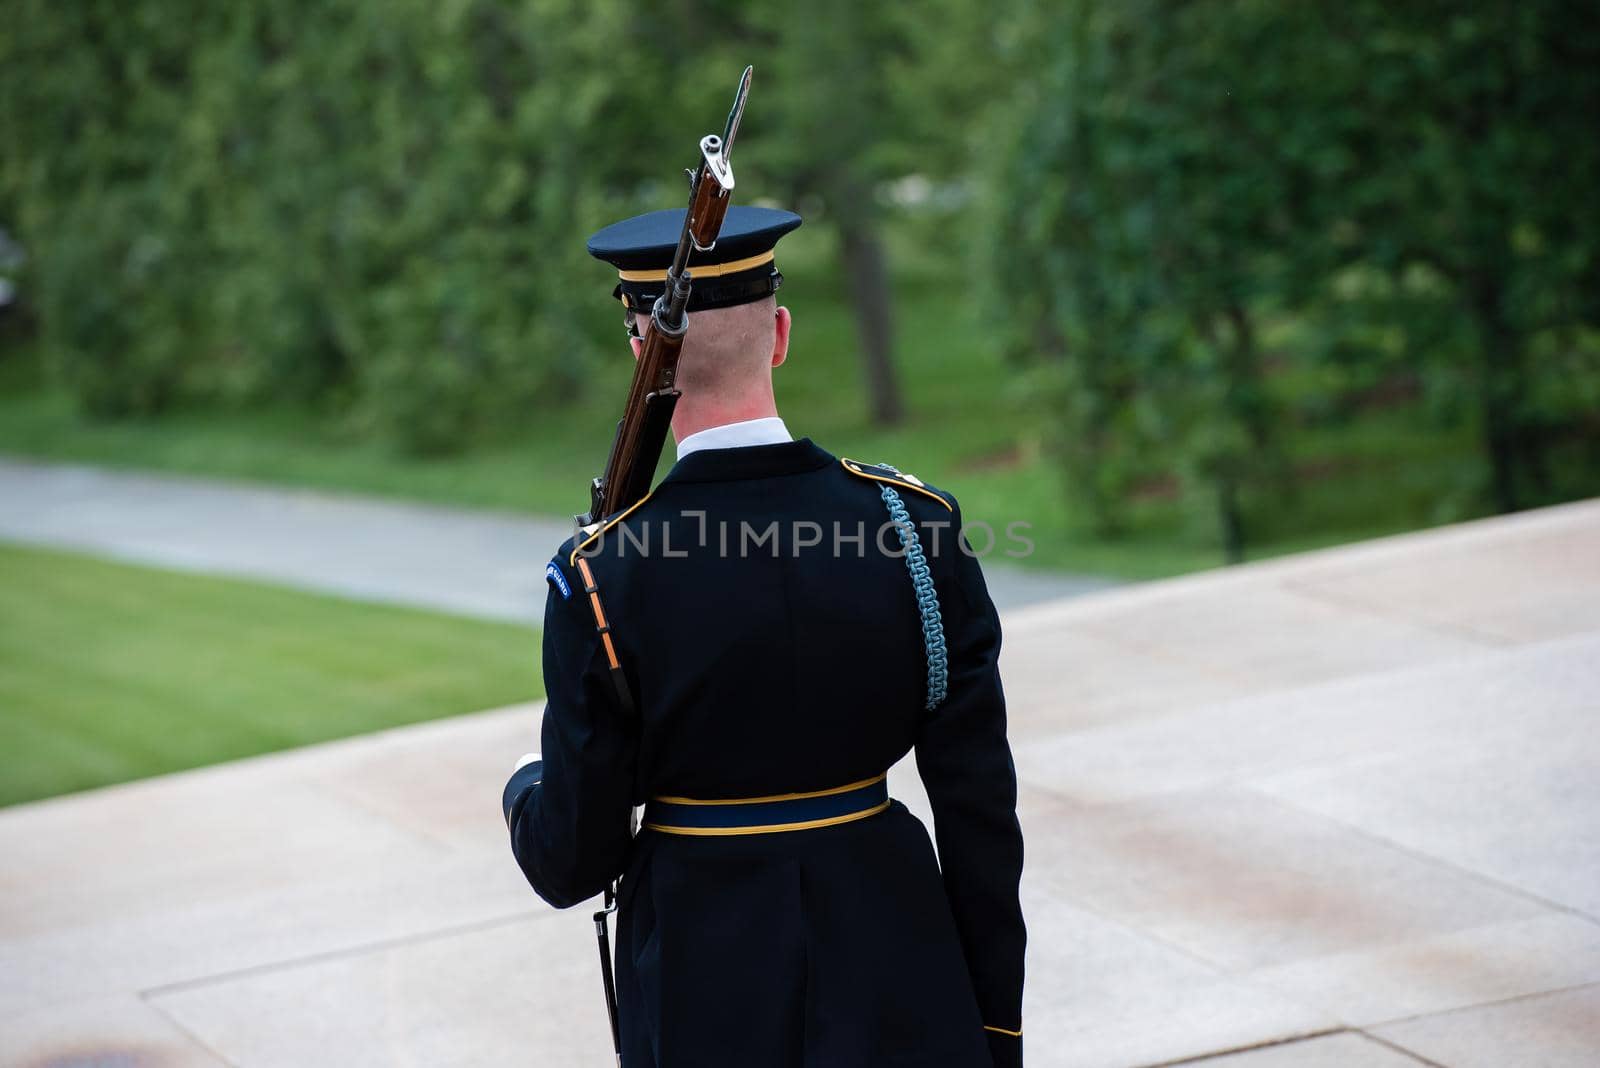 Ceremony at the Tomb of the Unknown soldier in Arlington, VA cadet from the back